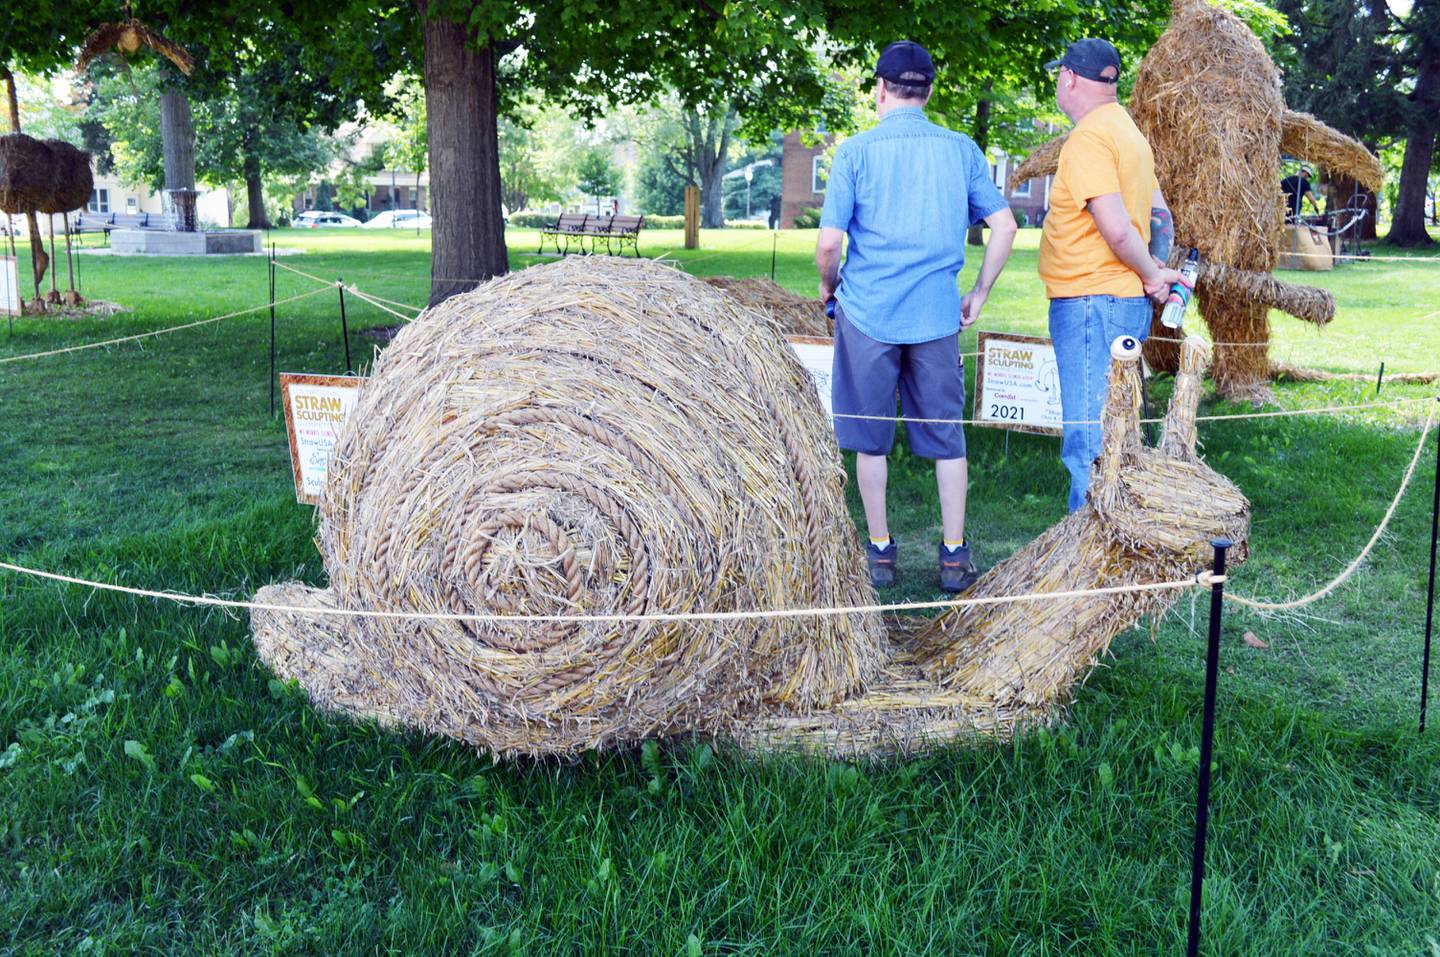 Chris and Cecilia Mann, of Rockford, won third place for Artists Choice with their sculpture “Die Schnecke,” which is German for “The Snail," in the seventh annual U.S. National Straw Sculpting Competition in Mt. Morris.